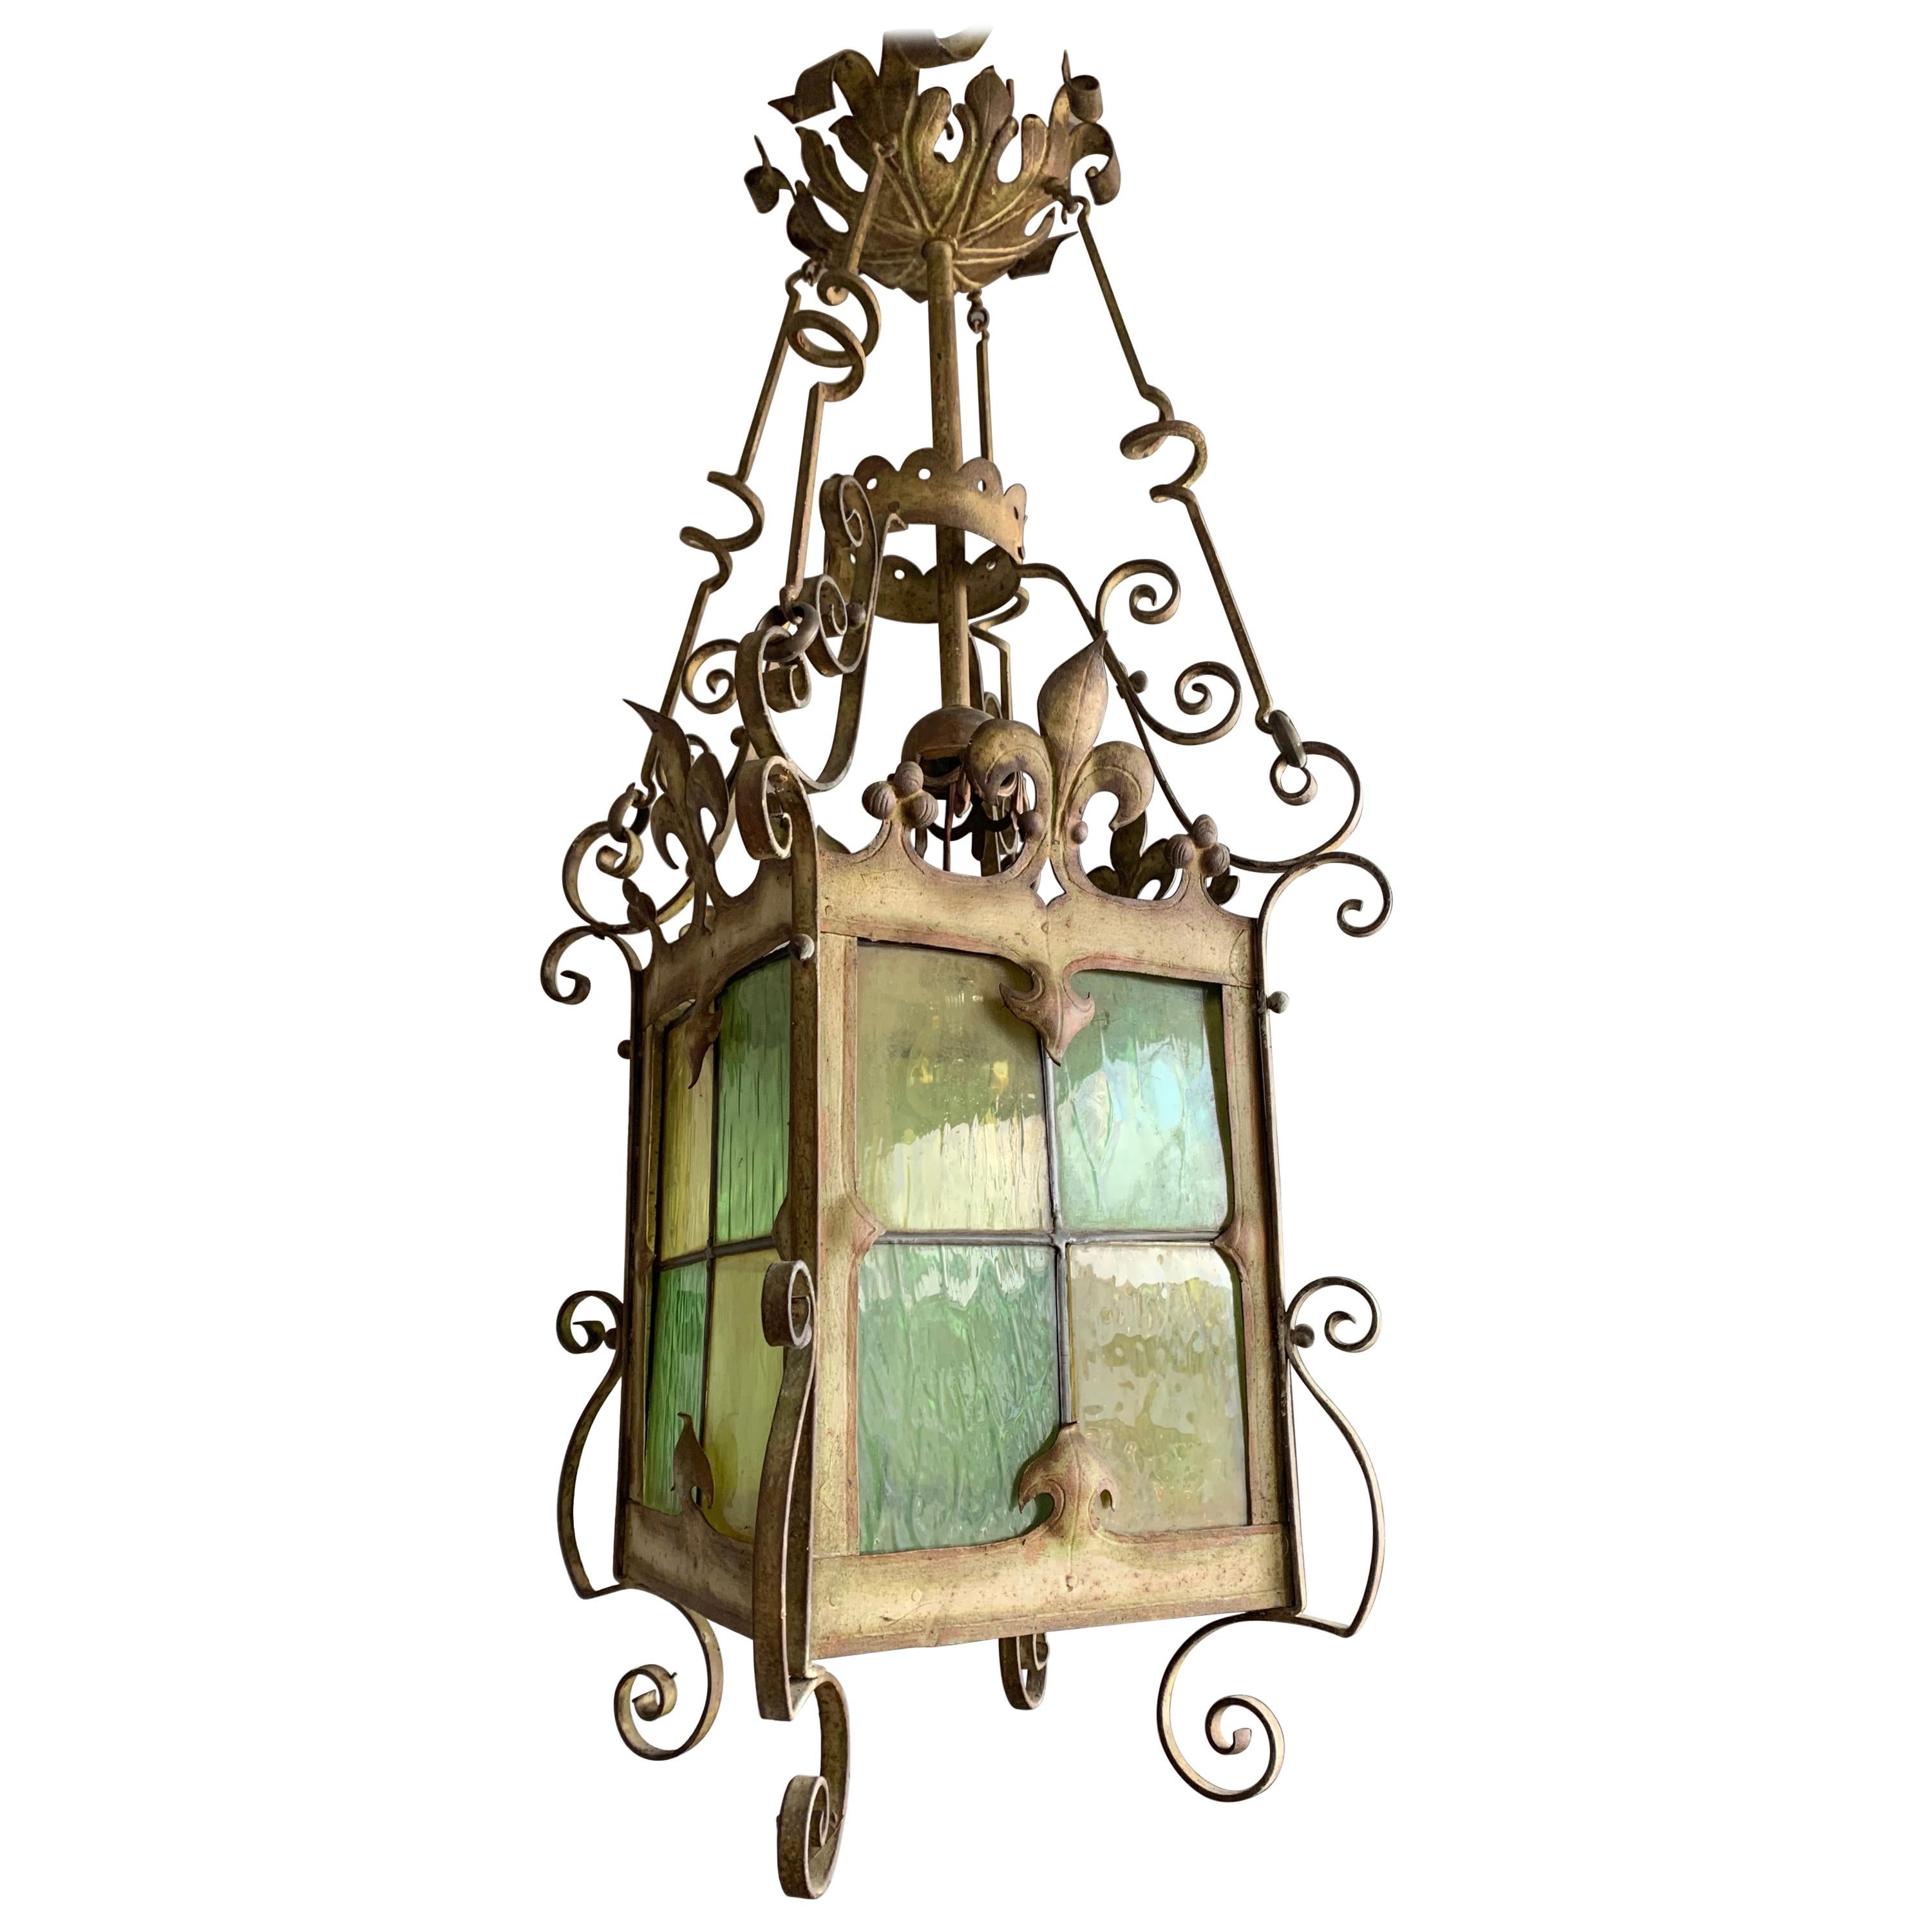 Extra Large Antique Gothic / Medieval Style Wrought Iron & Glass Art Lantern For Sale